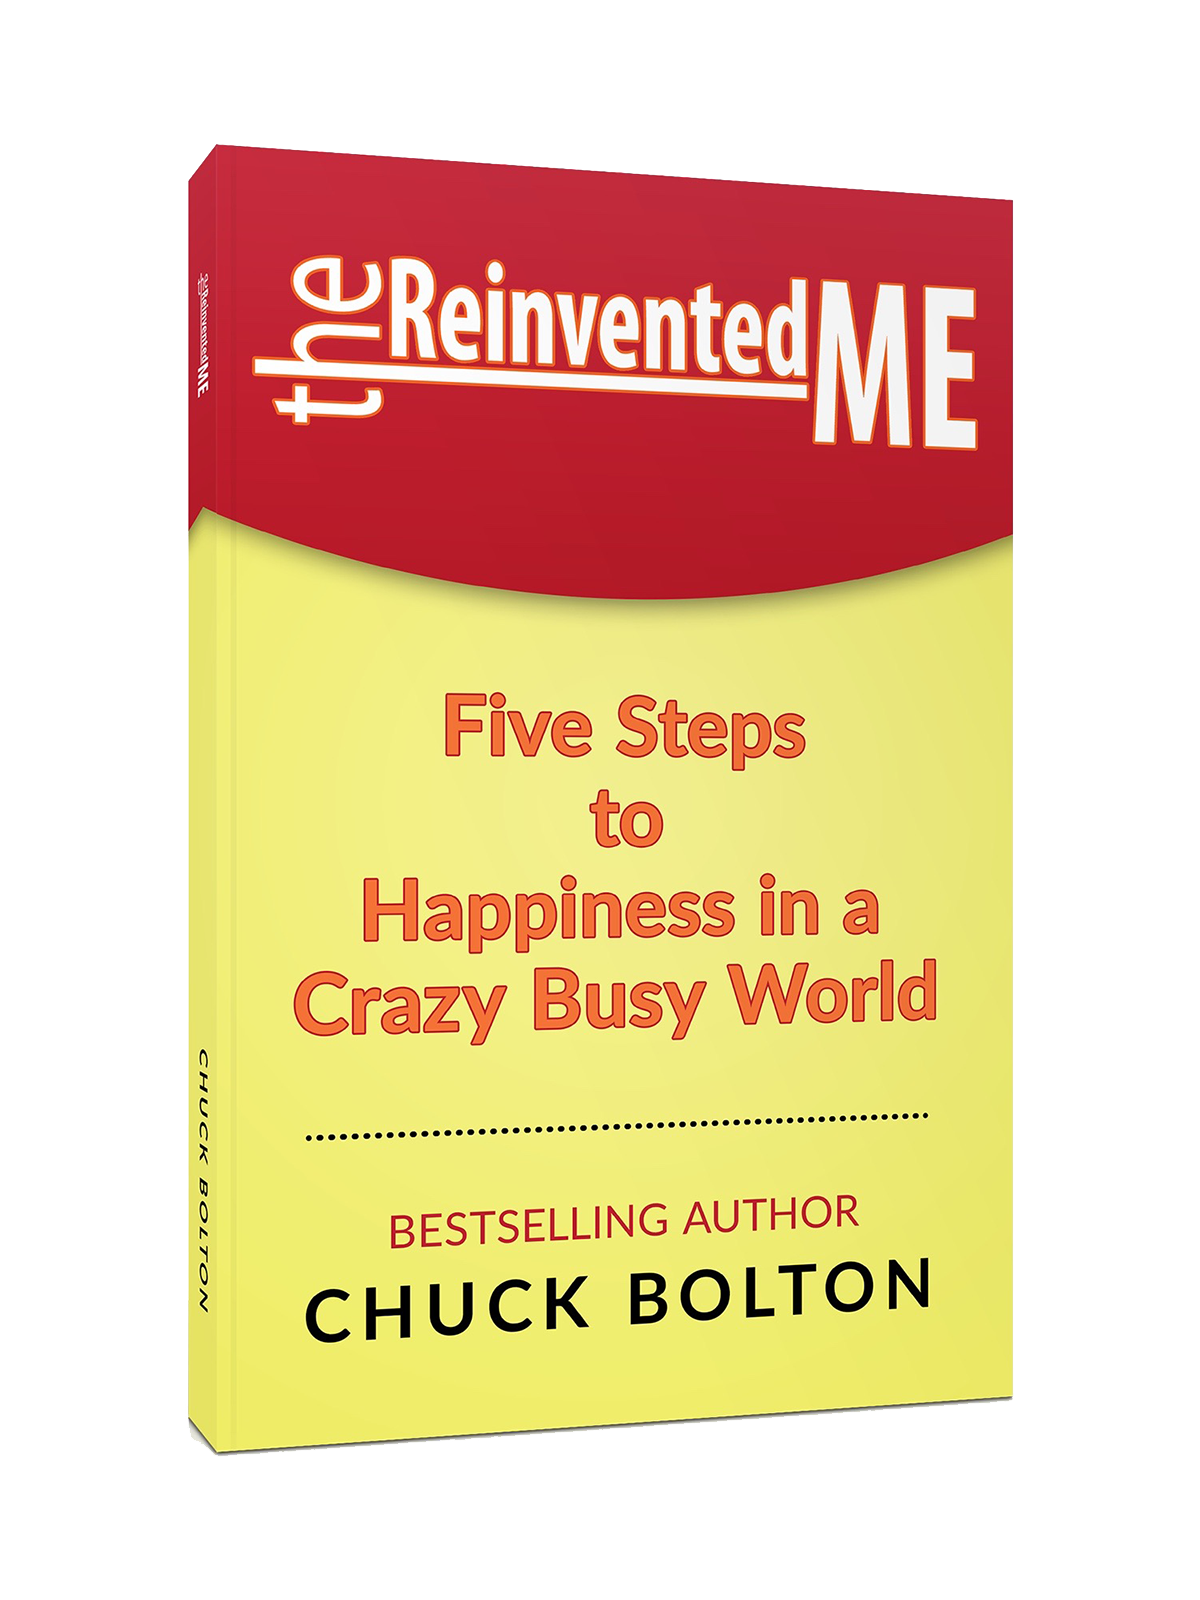 The Reinvented Me - Bestselling Book by Executive Coach Chuck Bolton